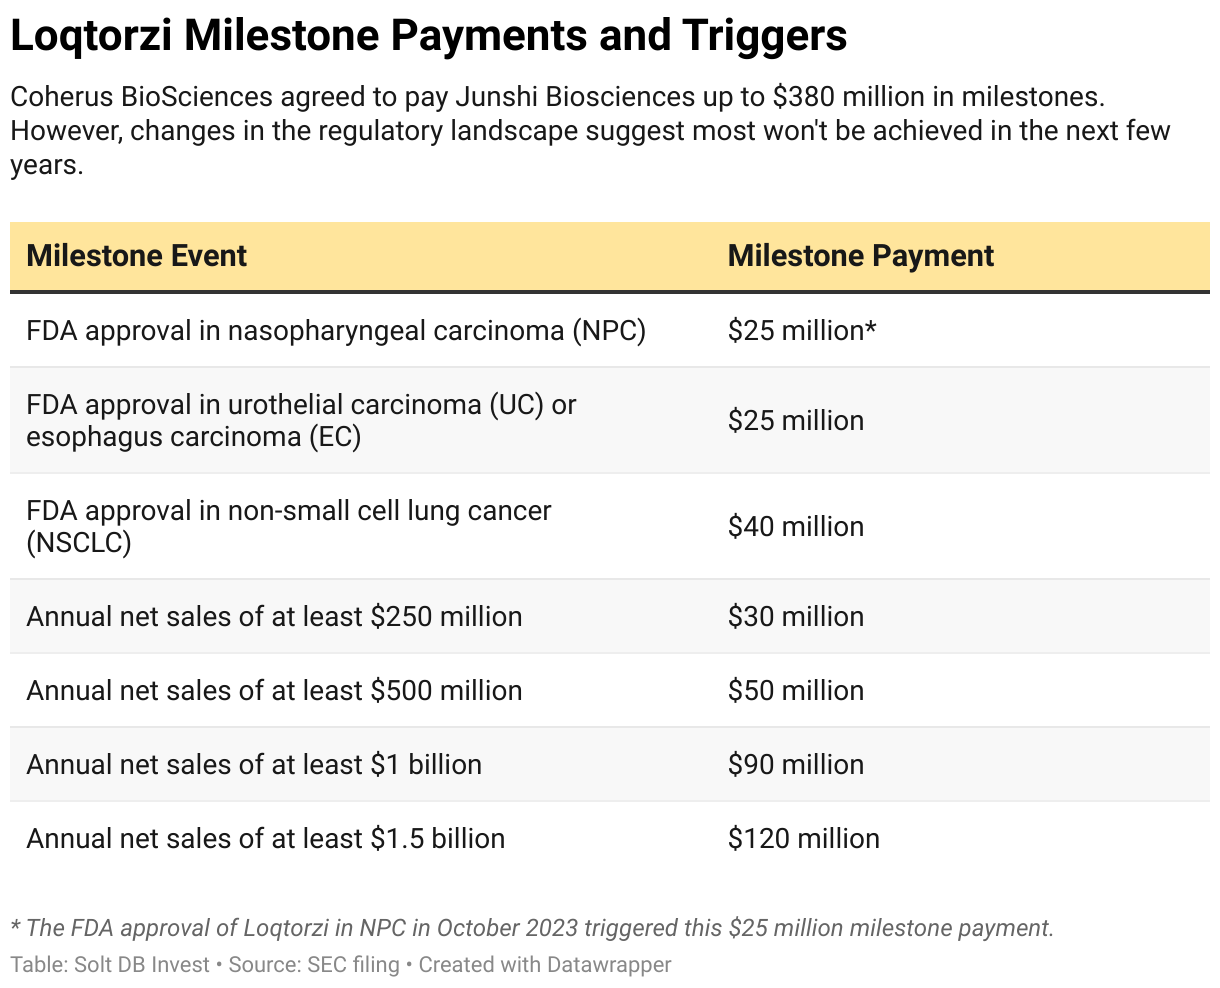 A table showing the milestone events and payment amounts for Loqtorzi, payable from Coherus BioSciences to Junshi Biosciences.